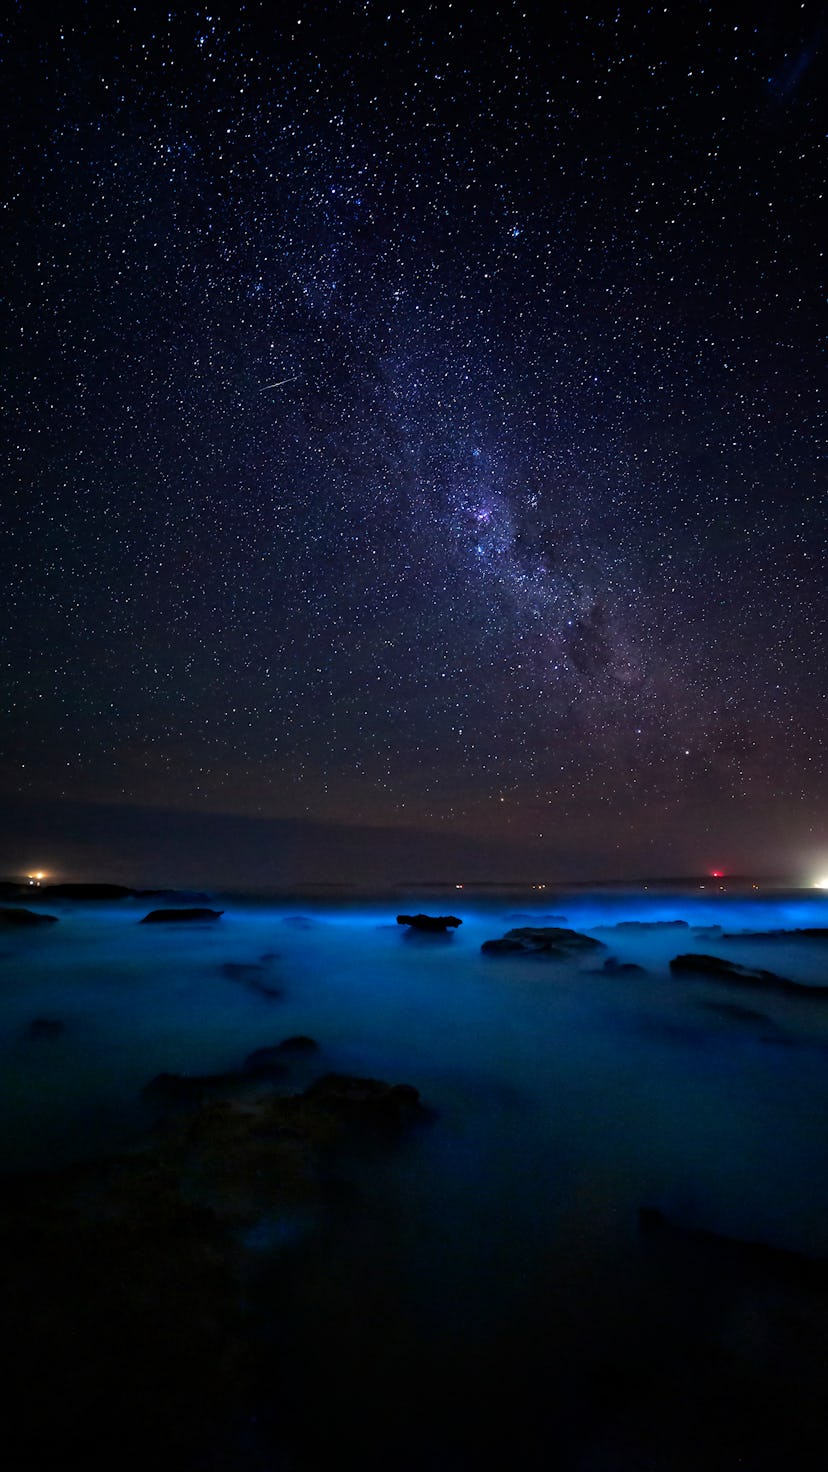 The ocean glowing a brilliant iridescent blue and glittering sparkly light from bioluminescent algae...